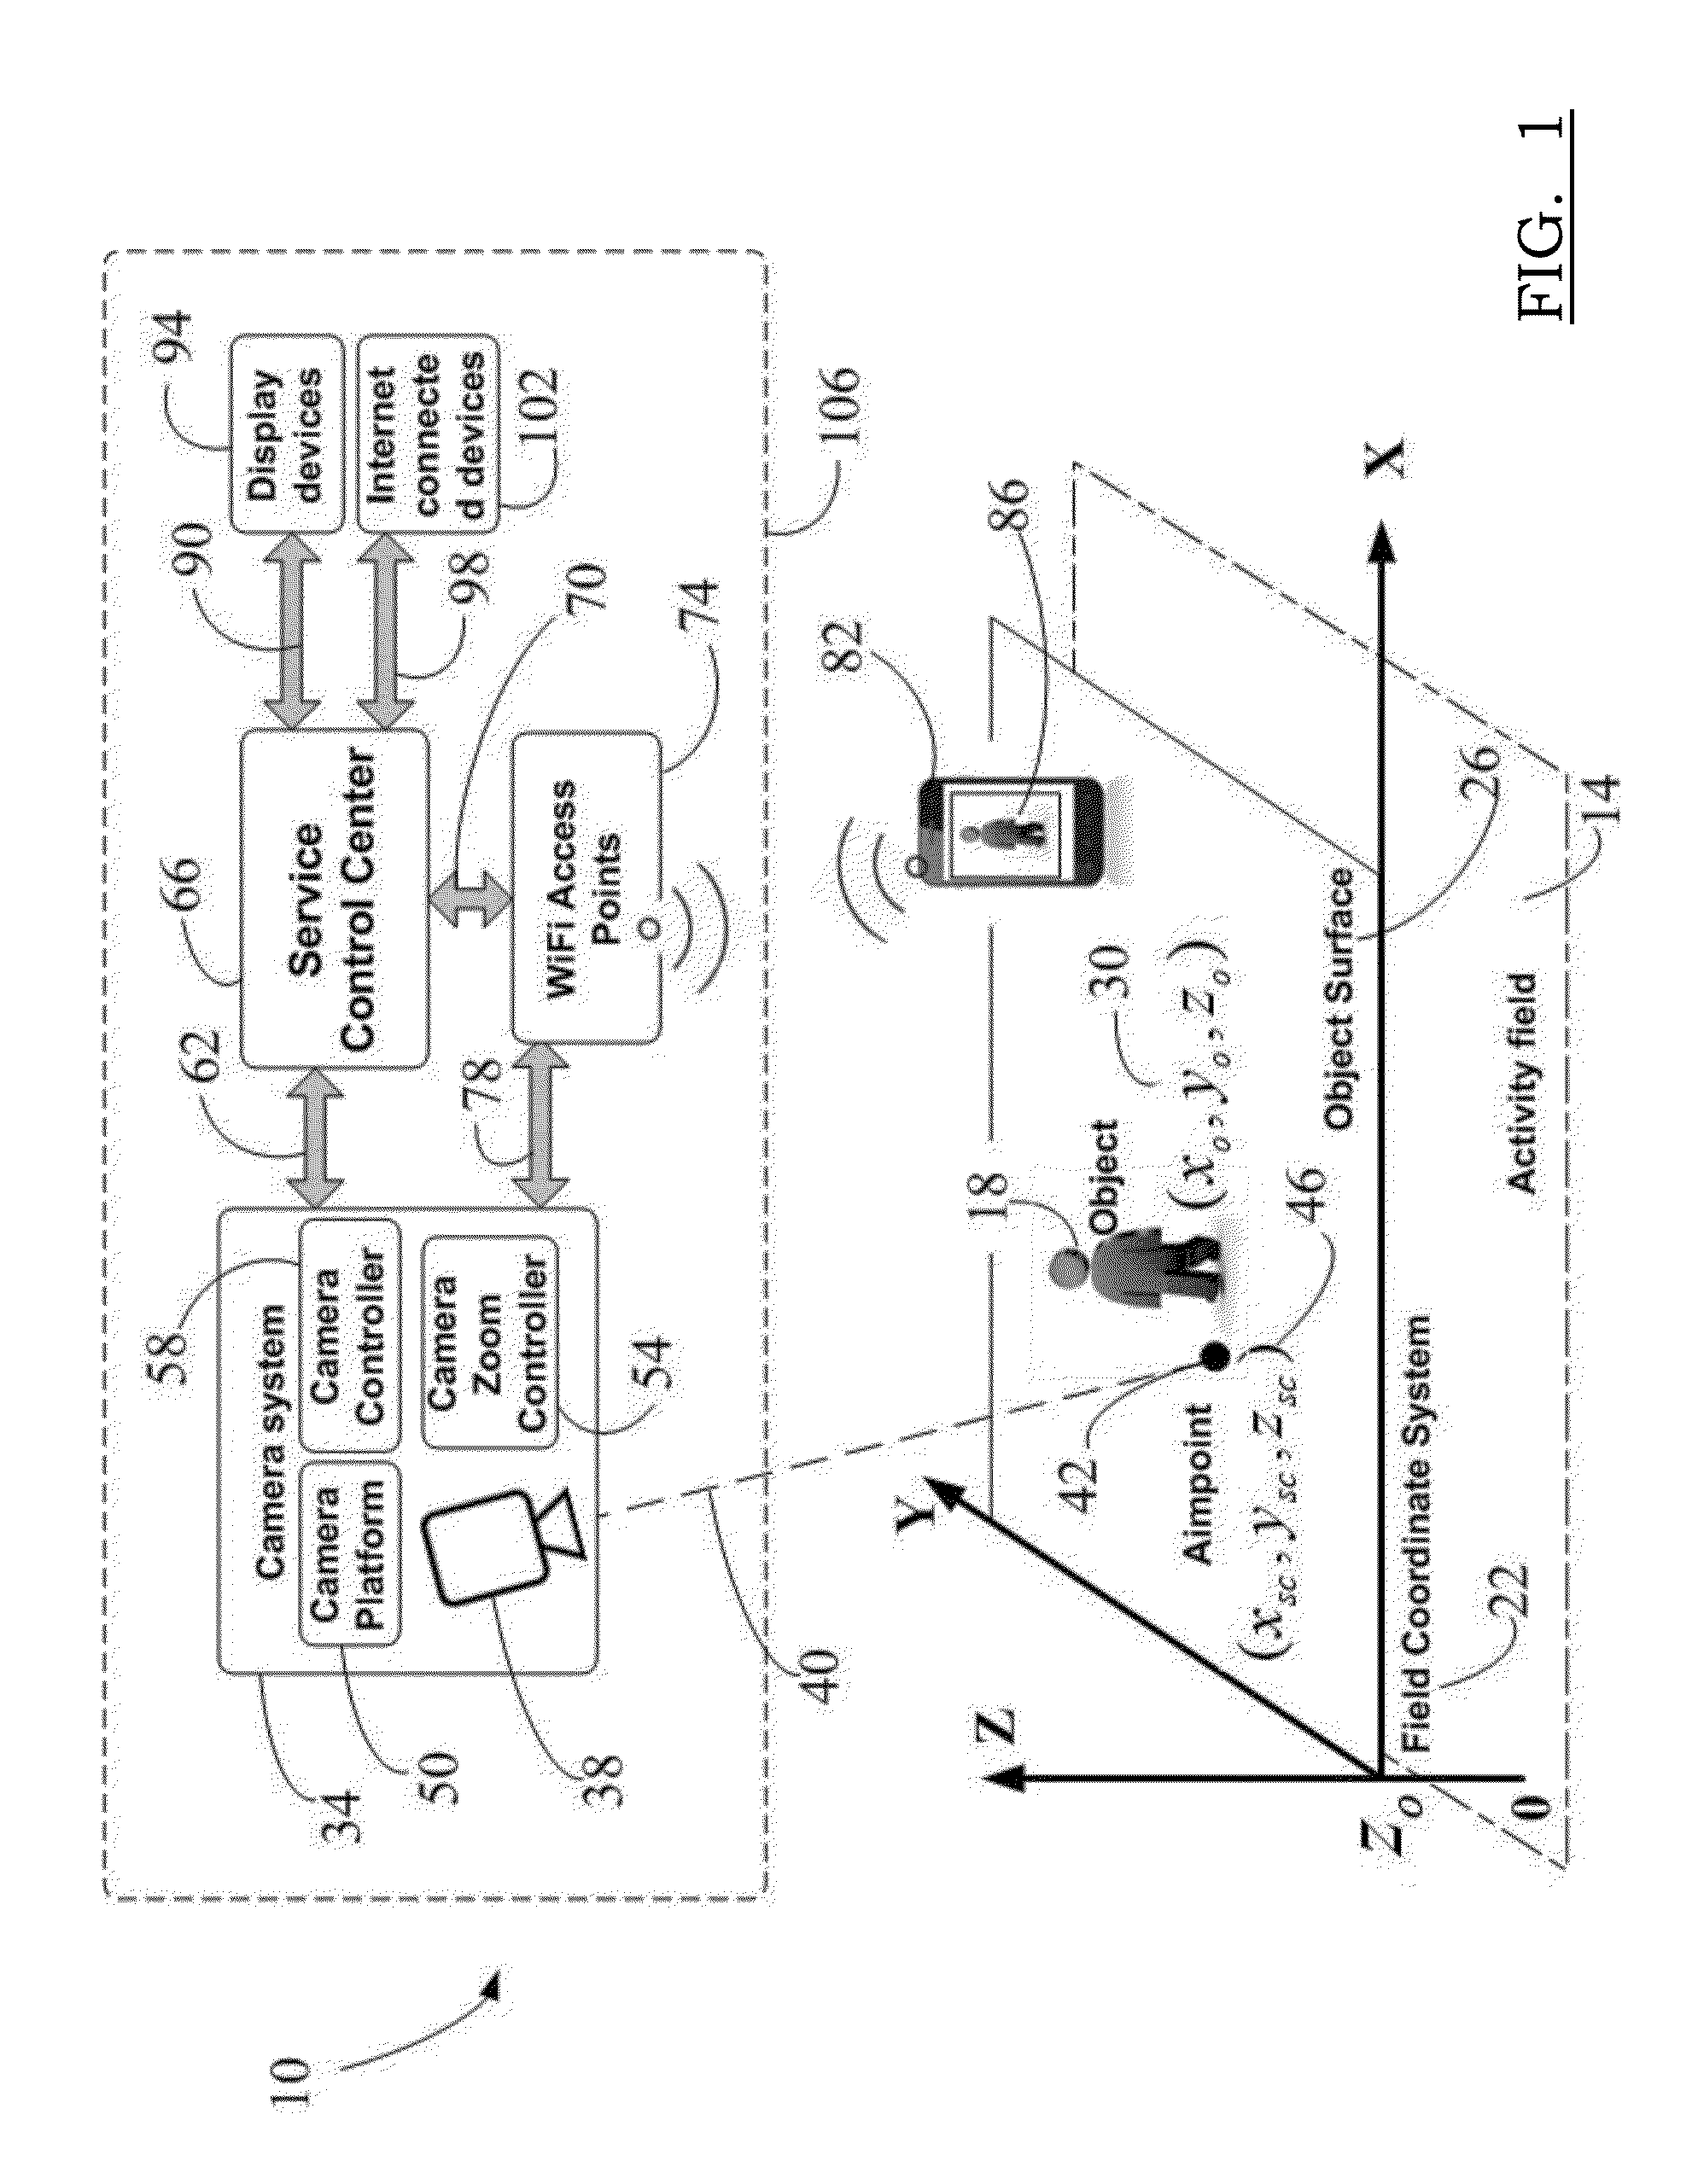 Automatic object viewing methods and apparatus